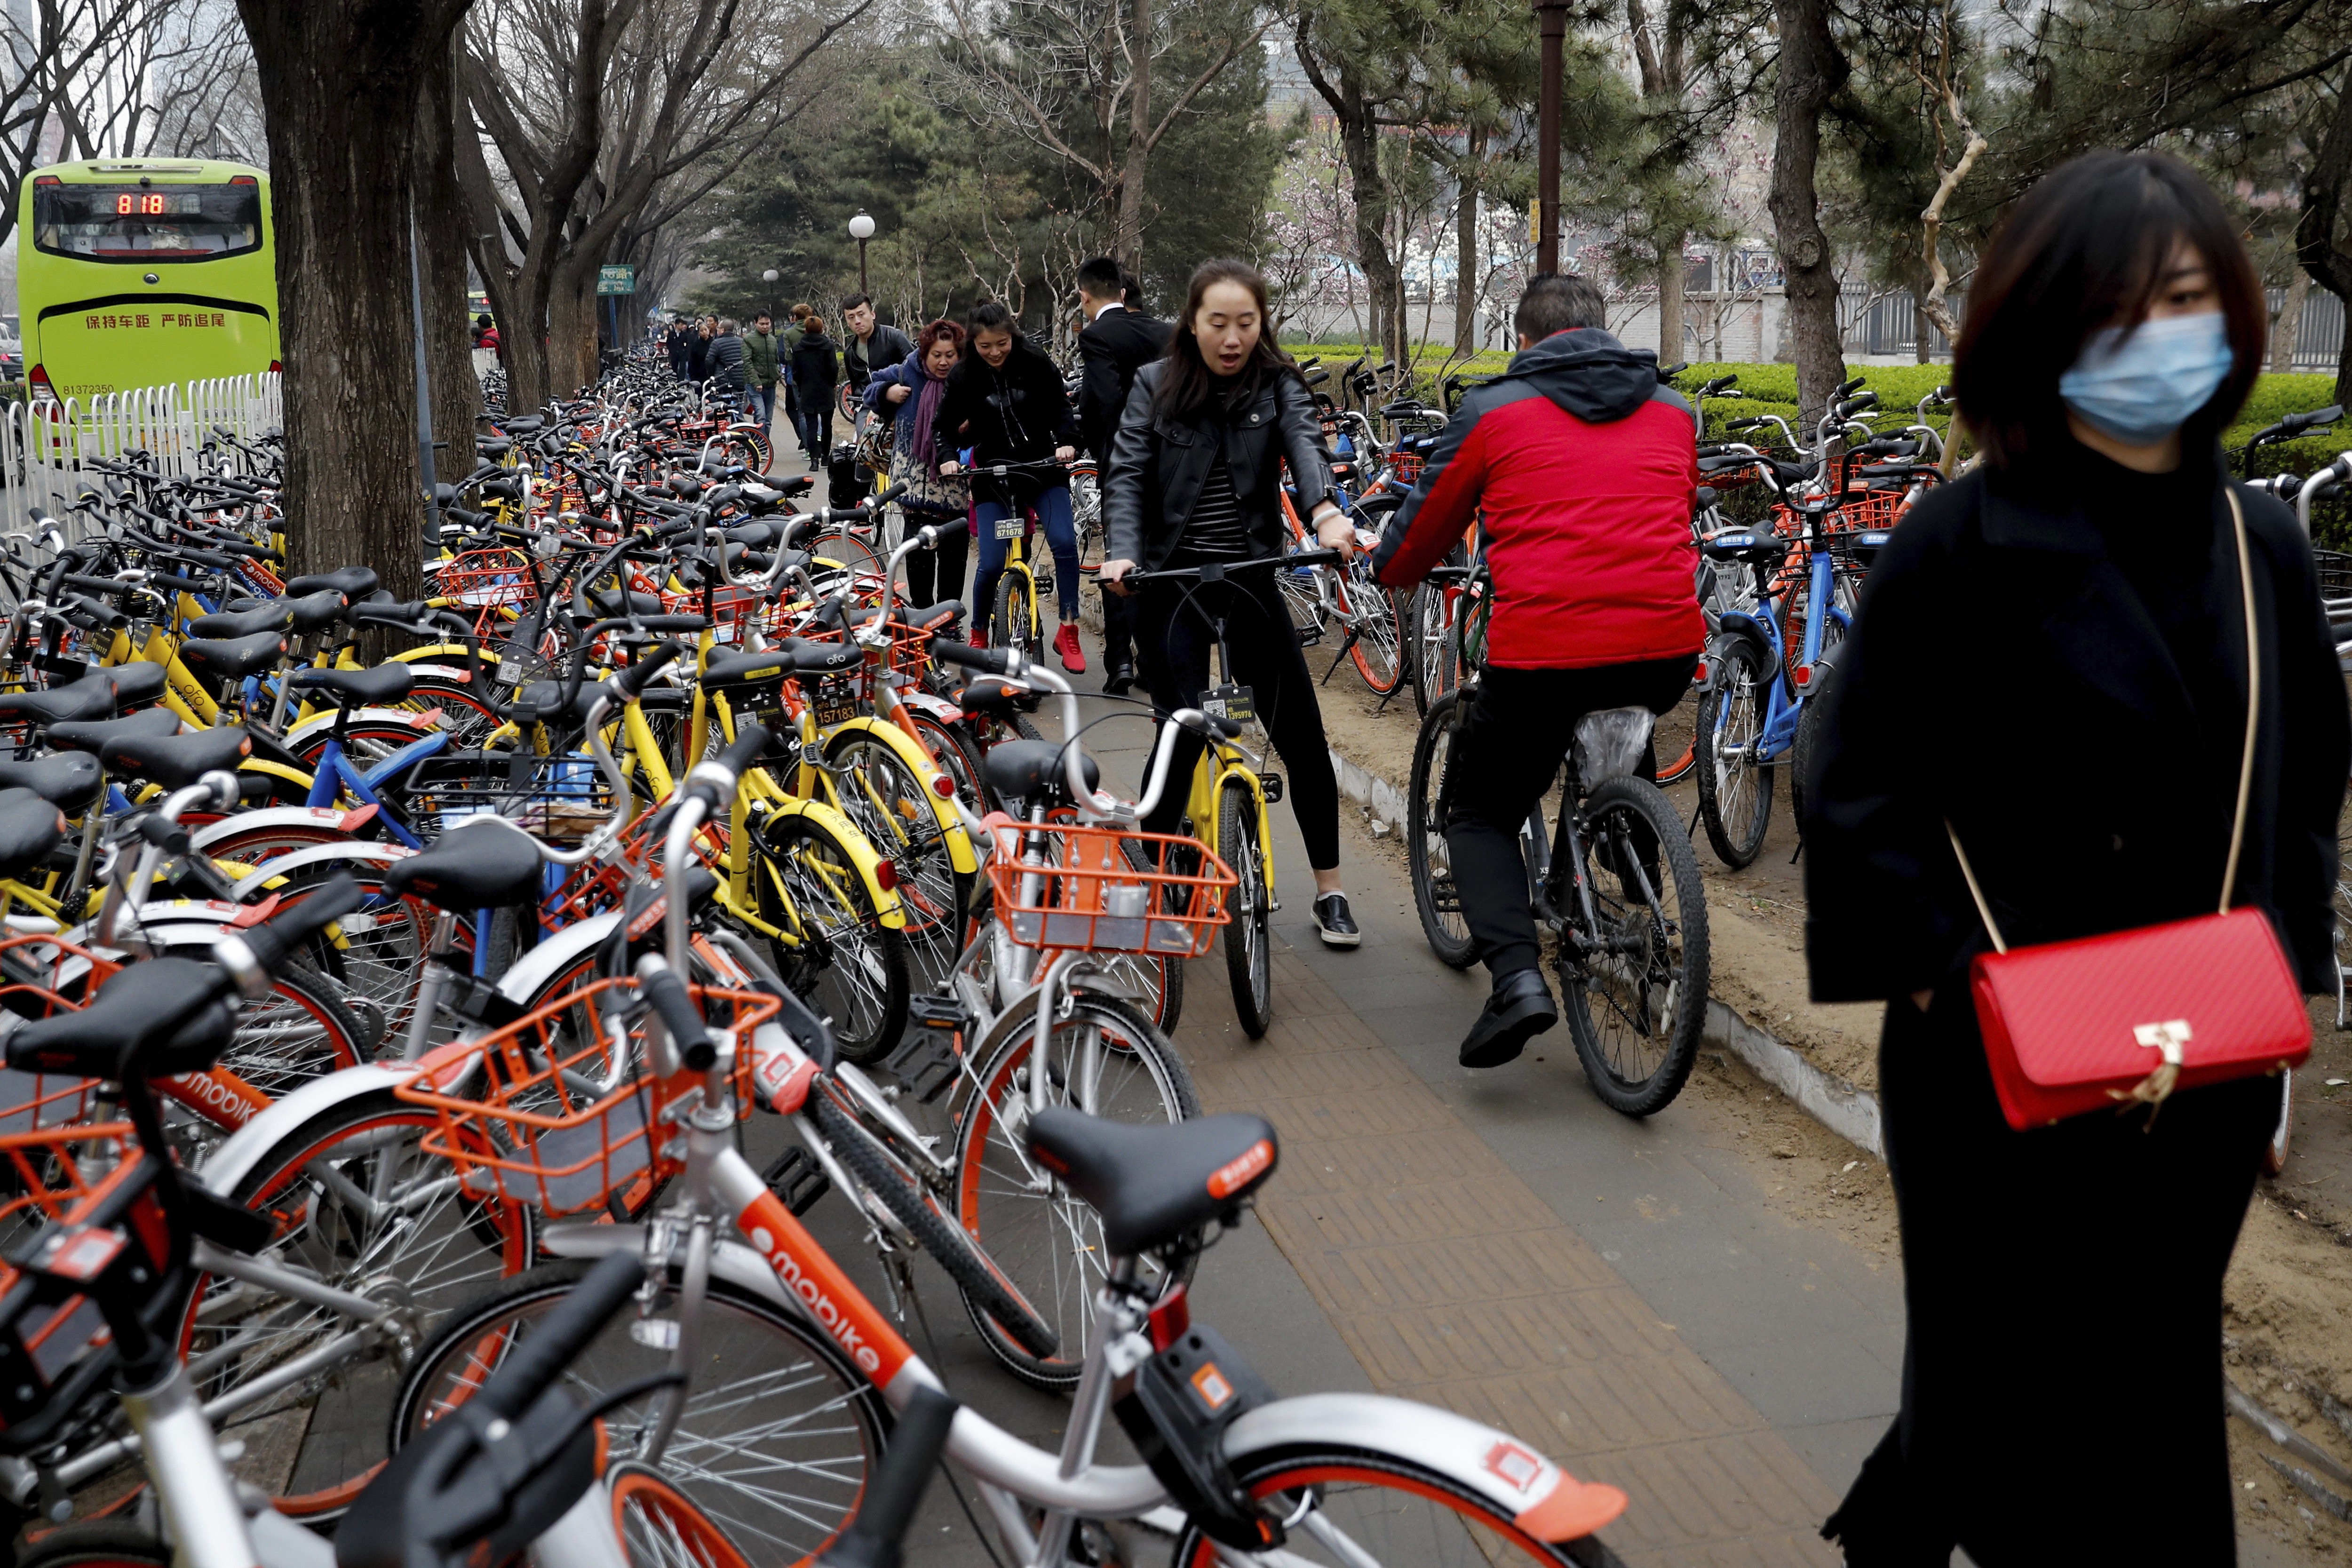 A sidewalk crowded with bicycles from the bike-sharing companies Ofo, Mobike and Bluegogo, near a bus stand in Beijing, China. Photo: AP